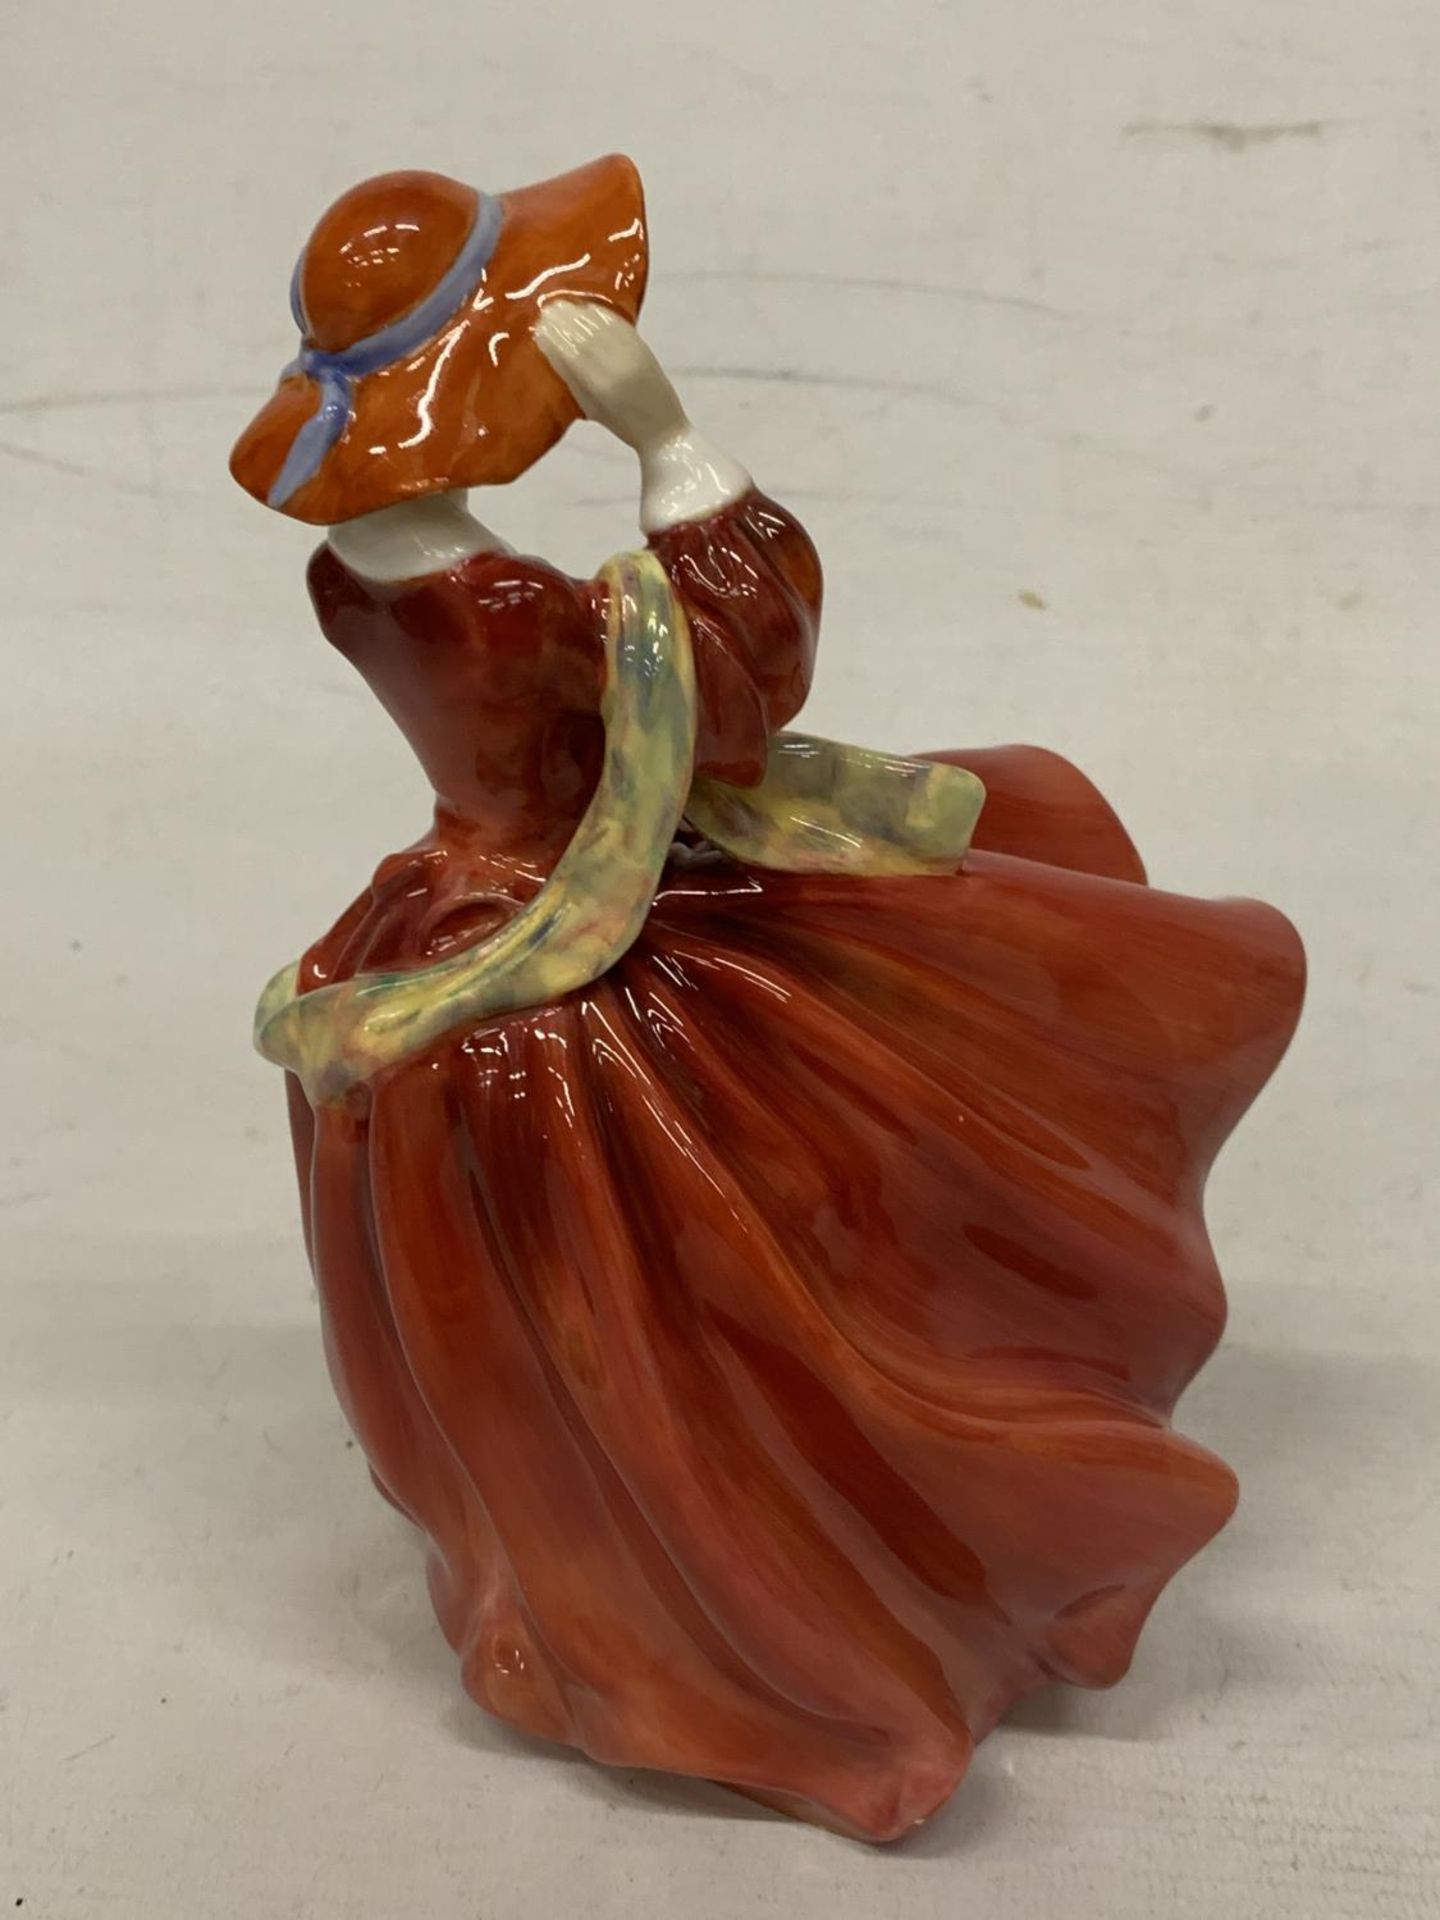 A ROYAL DOULTON FIGURINE "TOP O' THE HILL" HN 1834 - Image 3 of 5